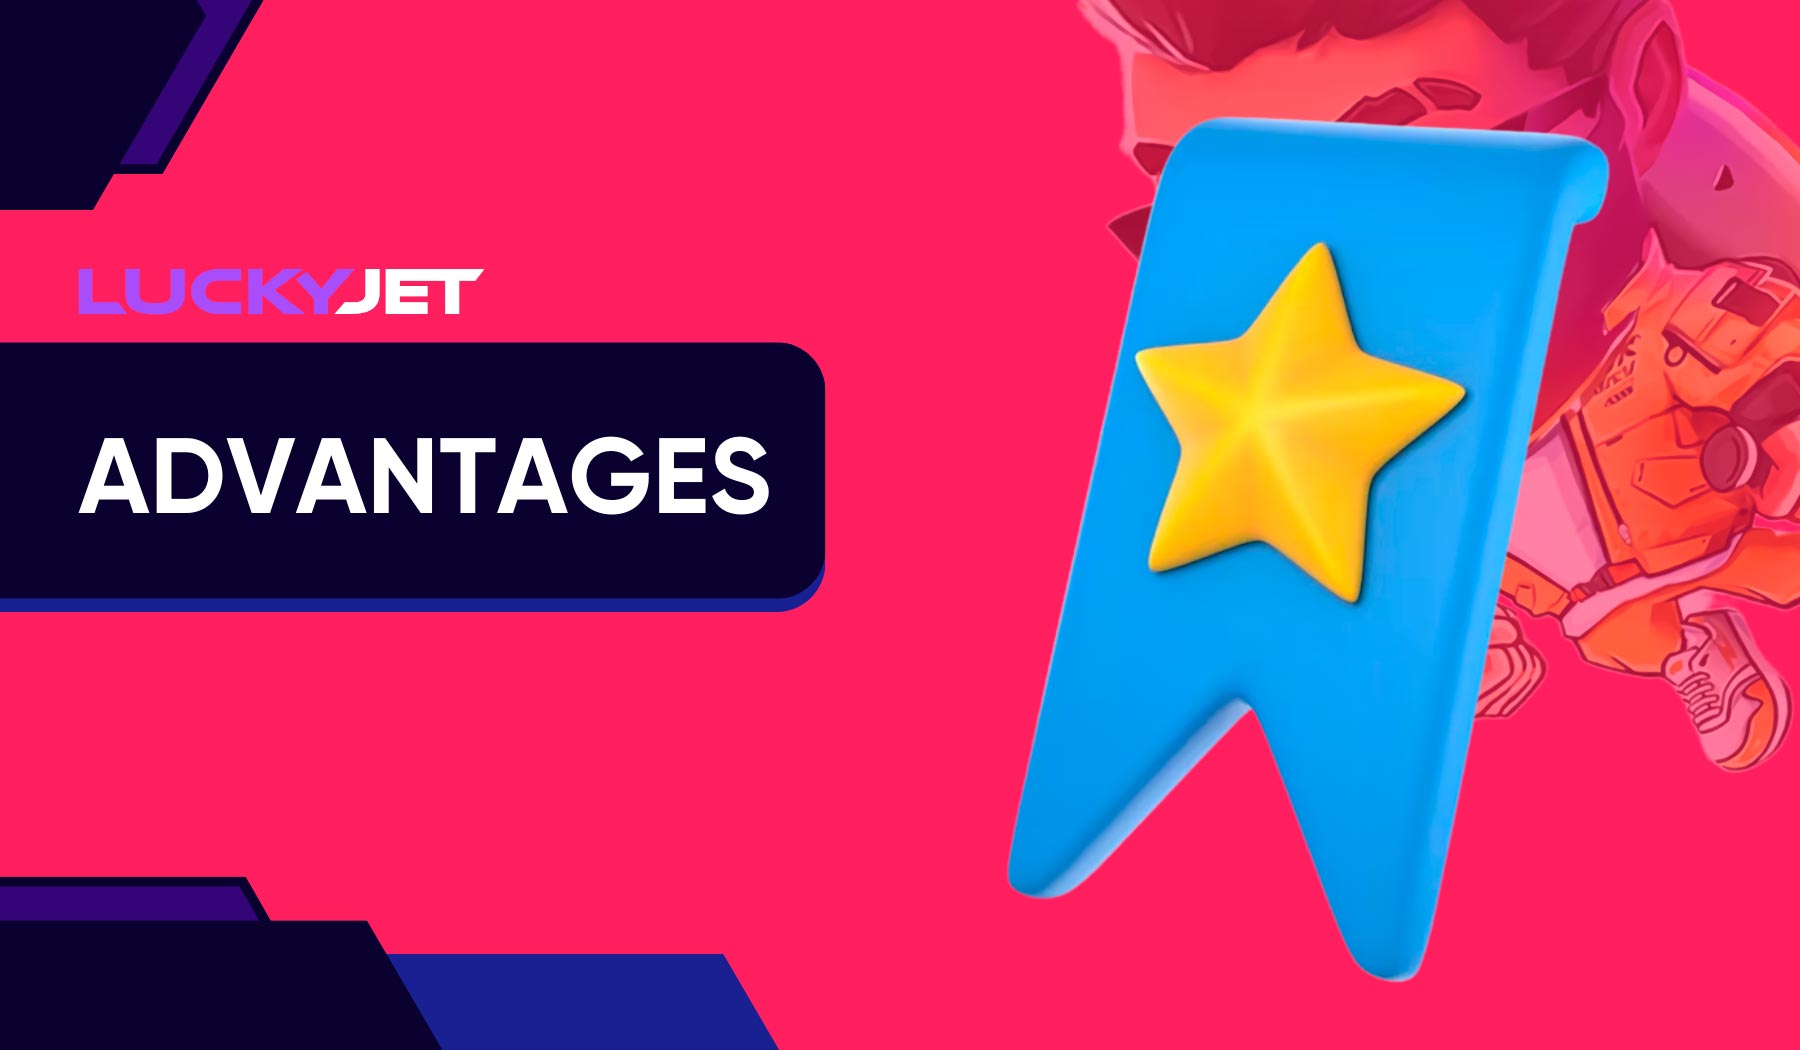 What are the benefits of 1xbet Lucky Jet